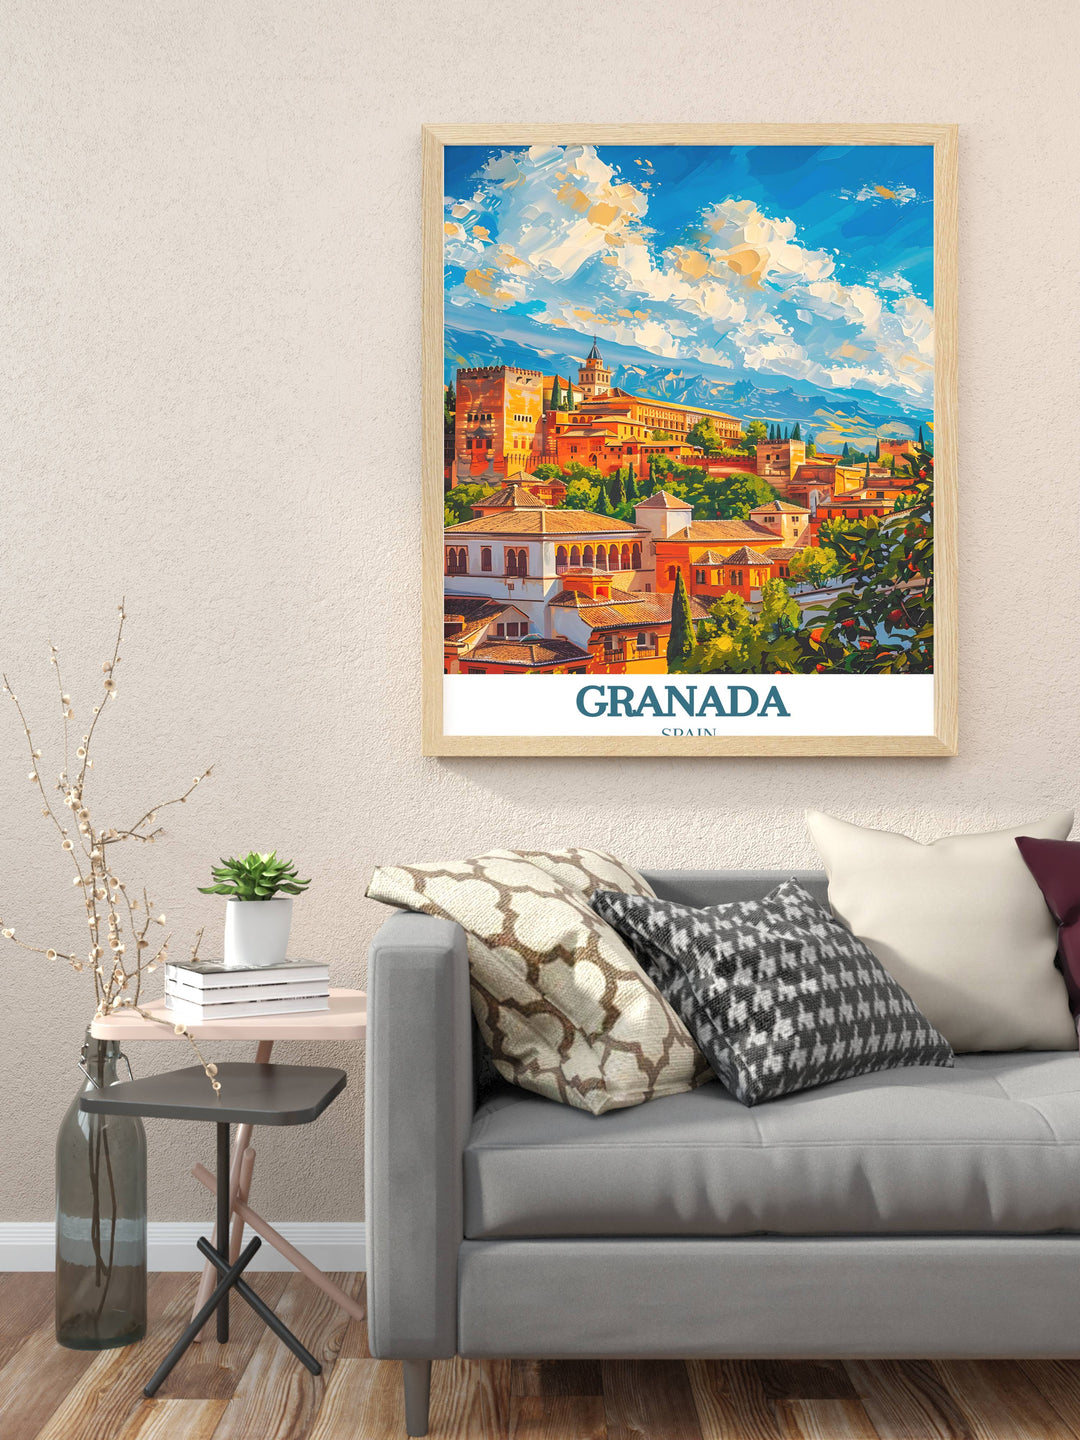 Add a touch of Spanish culture to your home with vibrant Granada Spain Art, perfect for infusing any space with Andalusian flair.